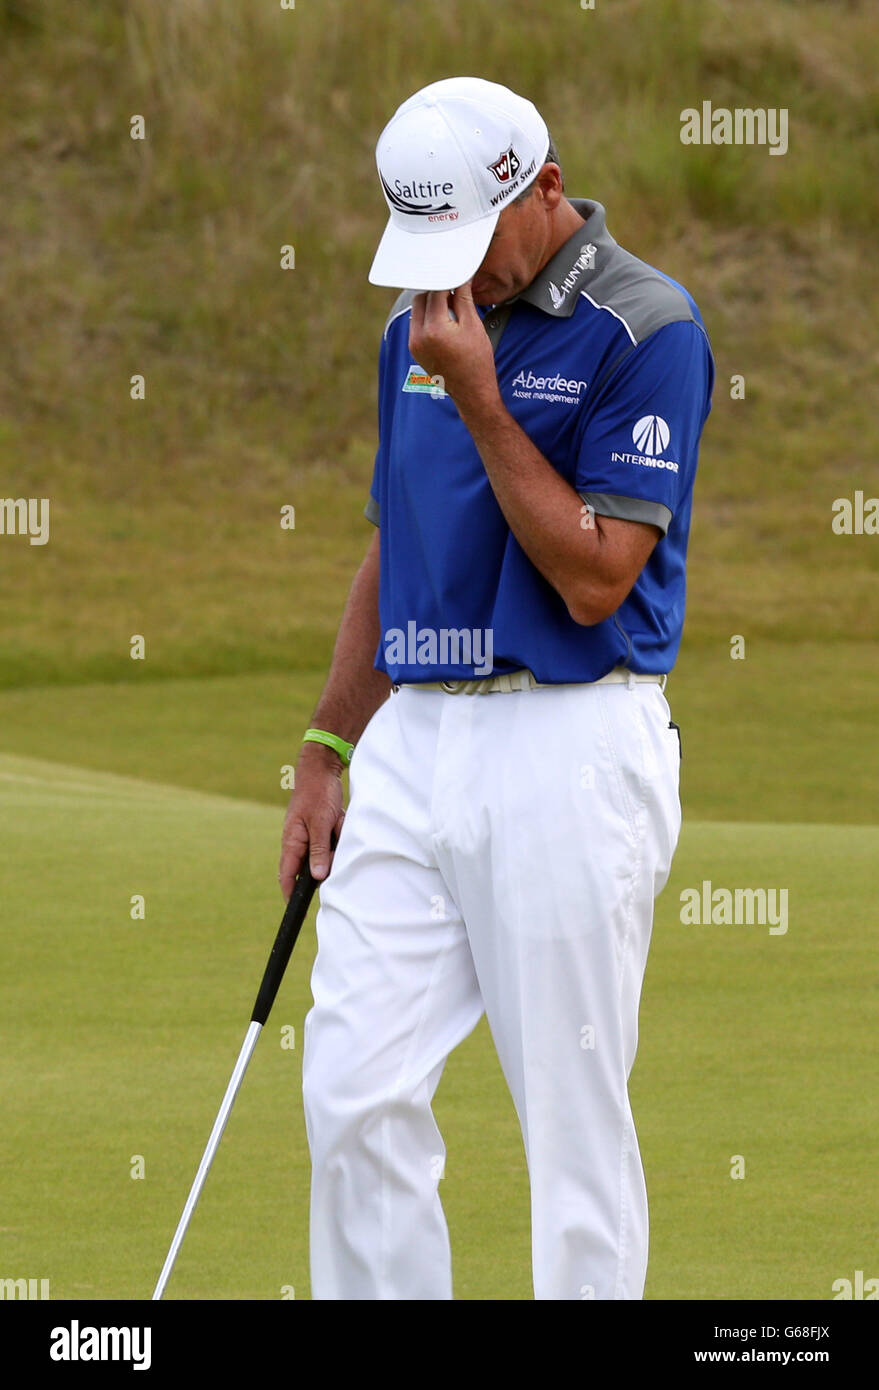 Paul Lawrie reacts after a member of the public shouted as he played the ball on the 14th during day two of the Aberdeen Asset Management Scottish Open at Castle Stuart Golf Course, Inverness. Stock Photo